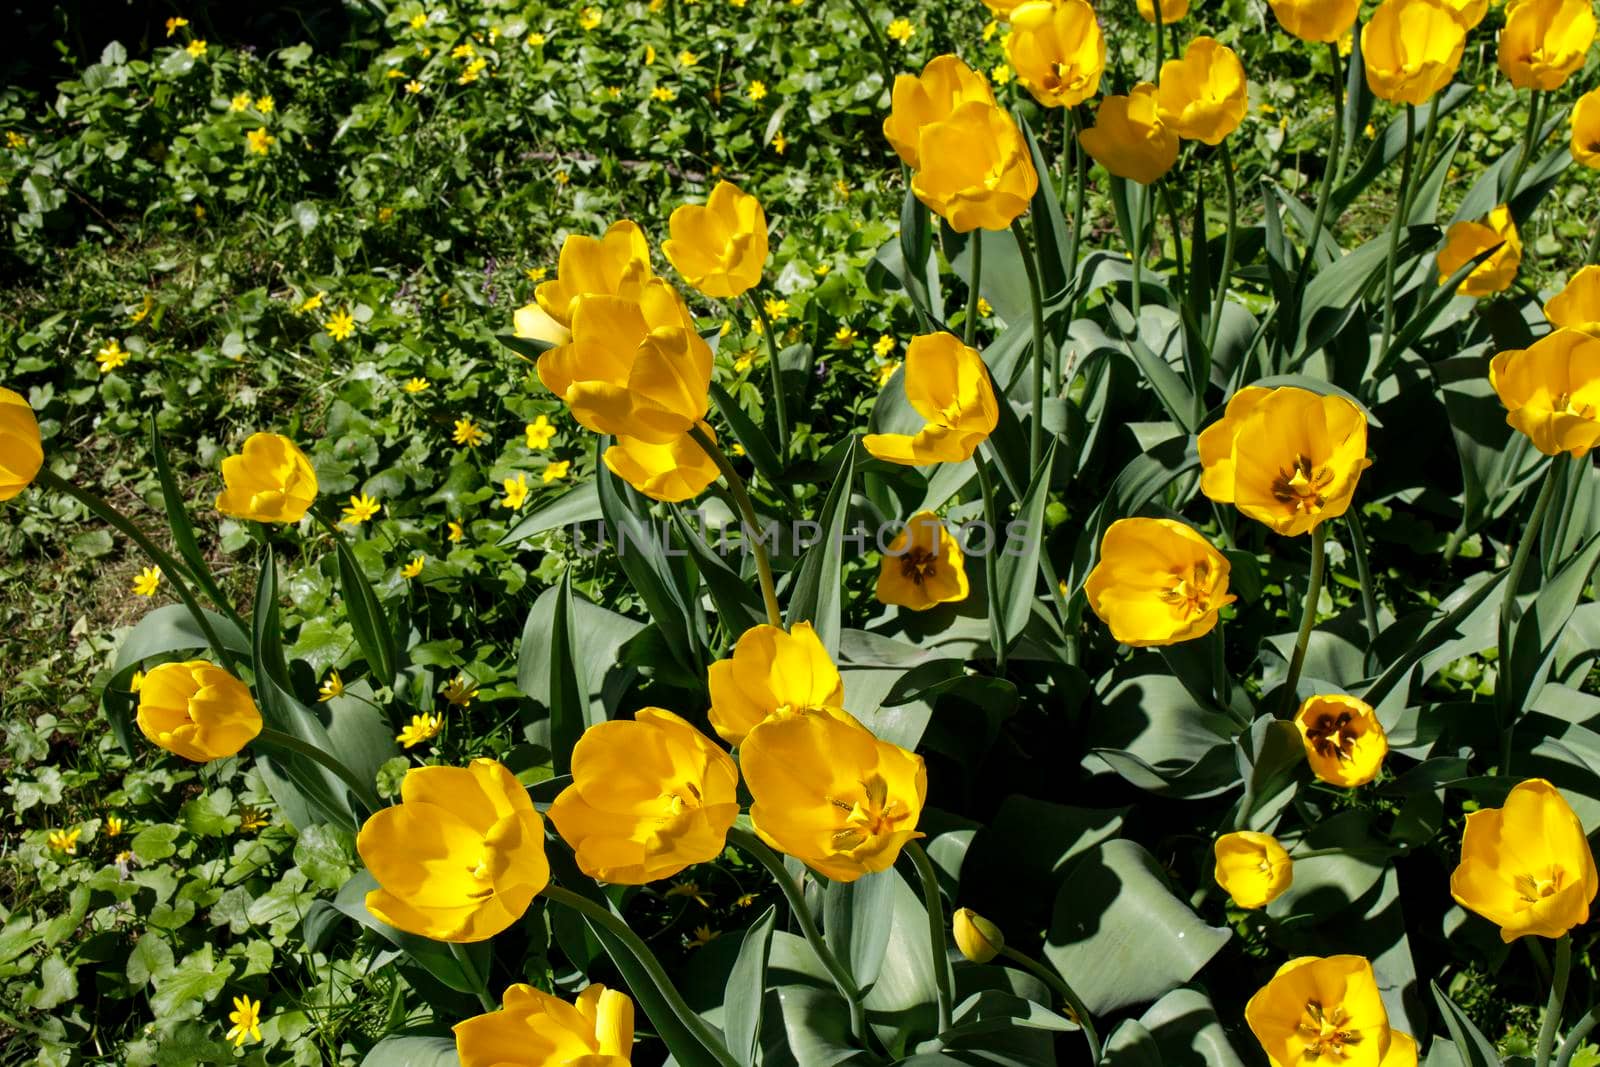 Yellow tulips are in the sun ligh in the spring garden. with falling petals